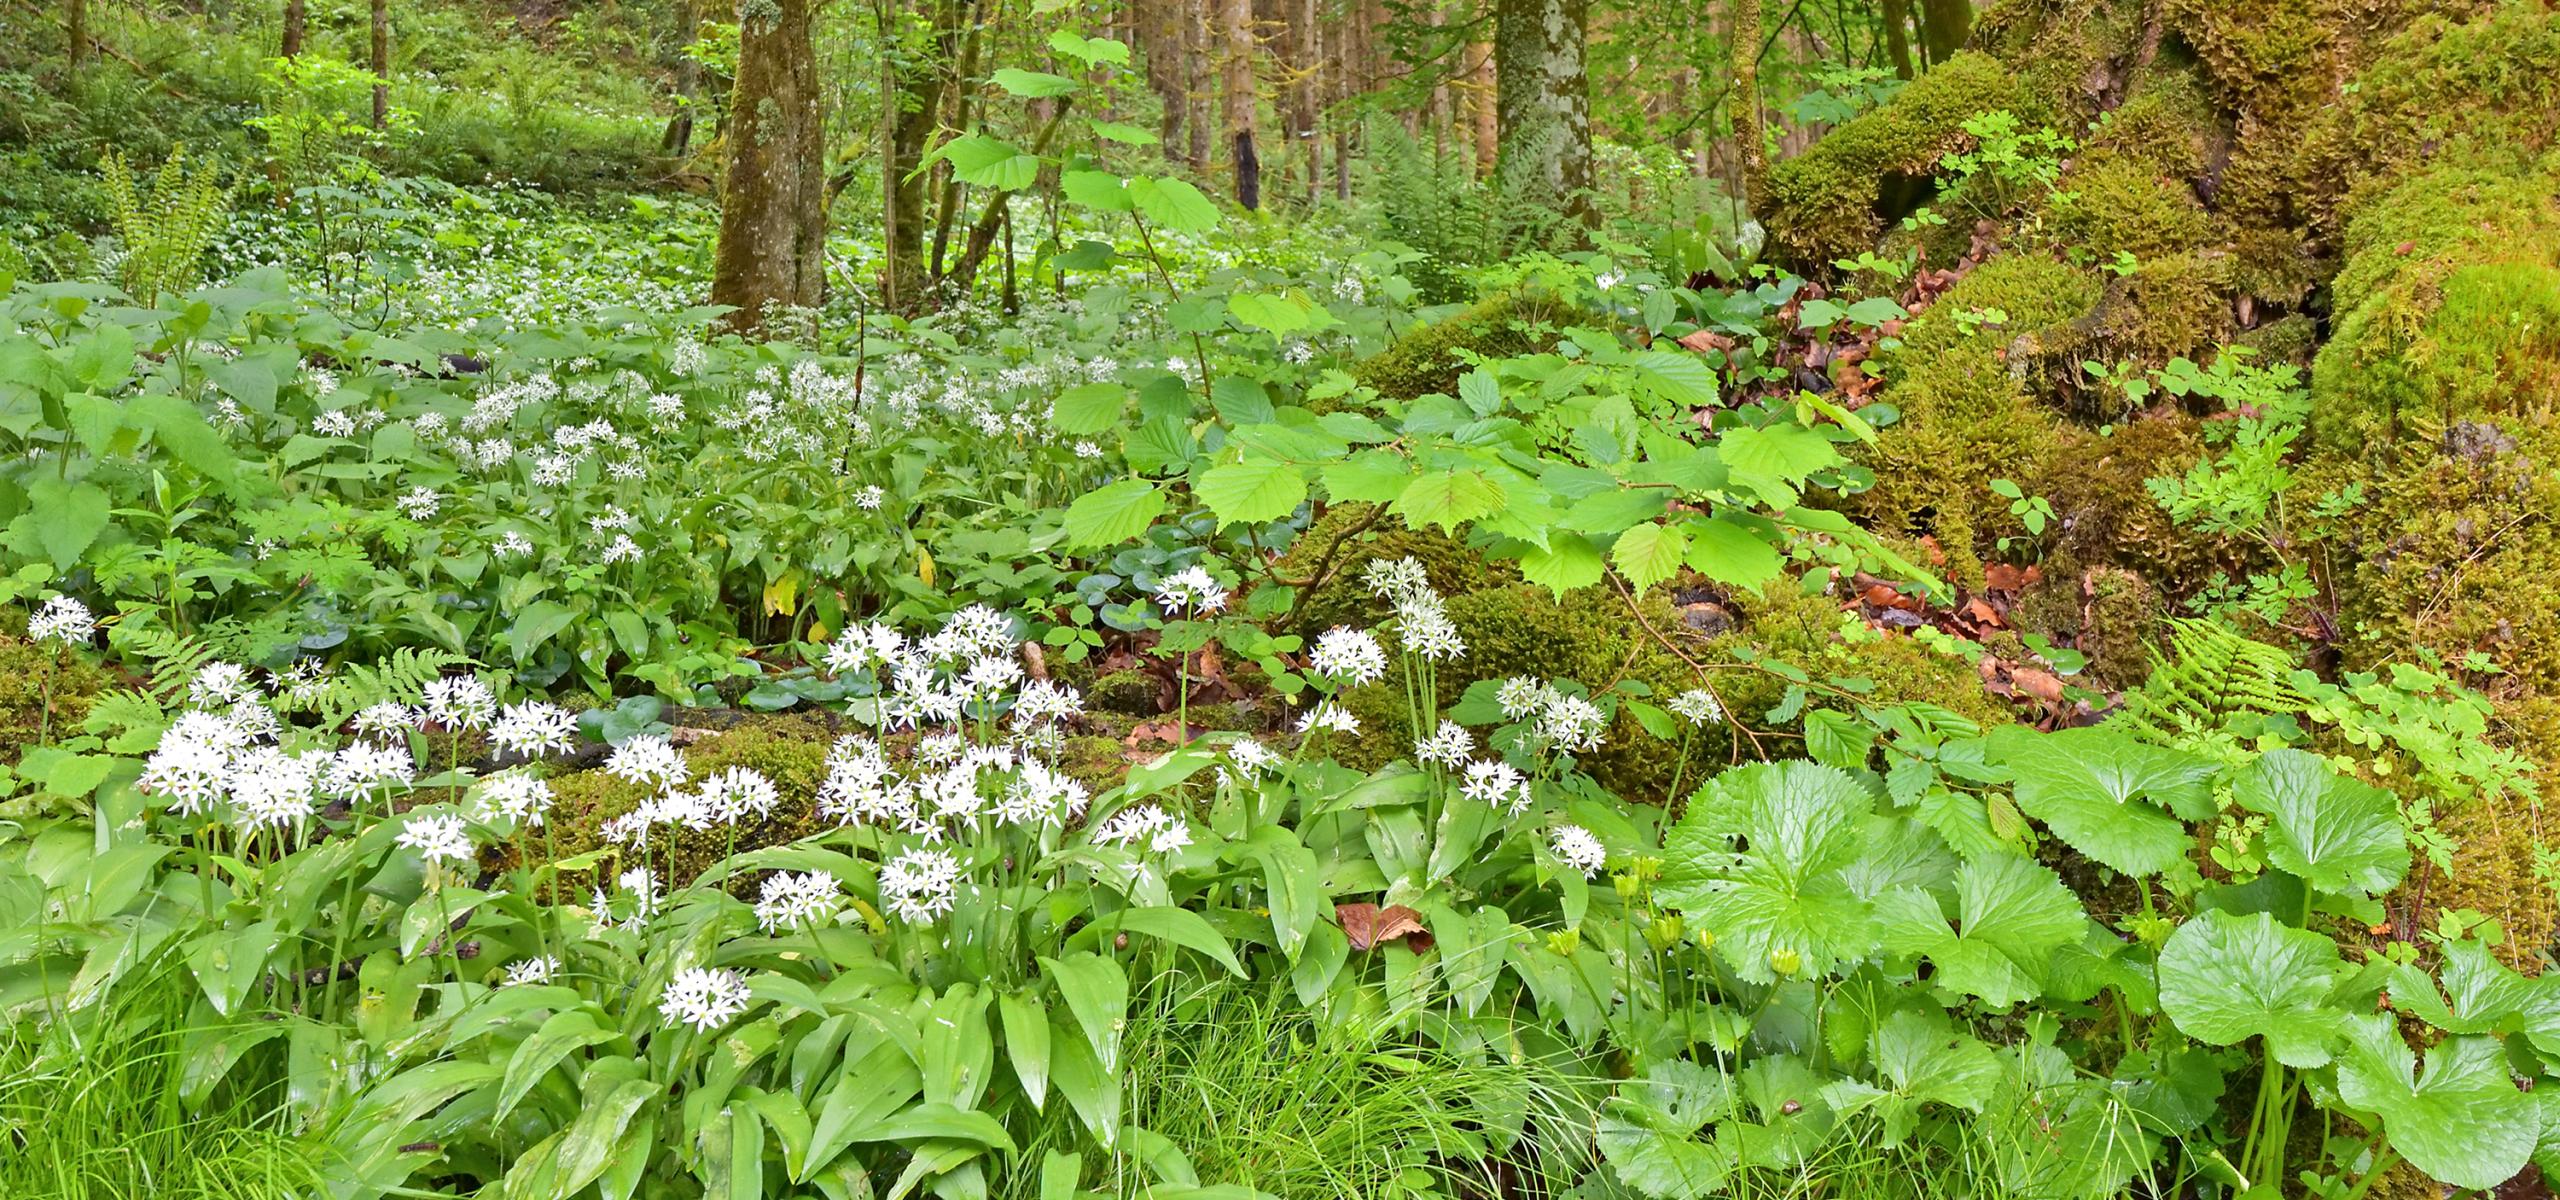 Wild garlic in bloom in a riparian forest area